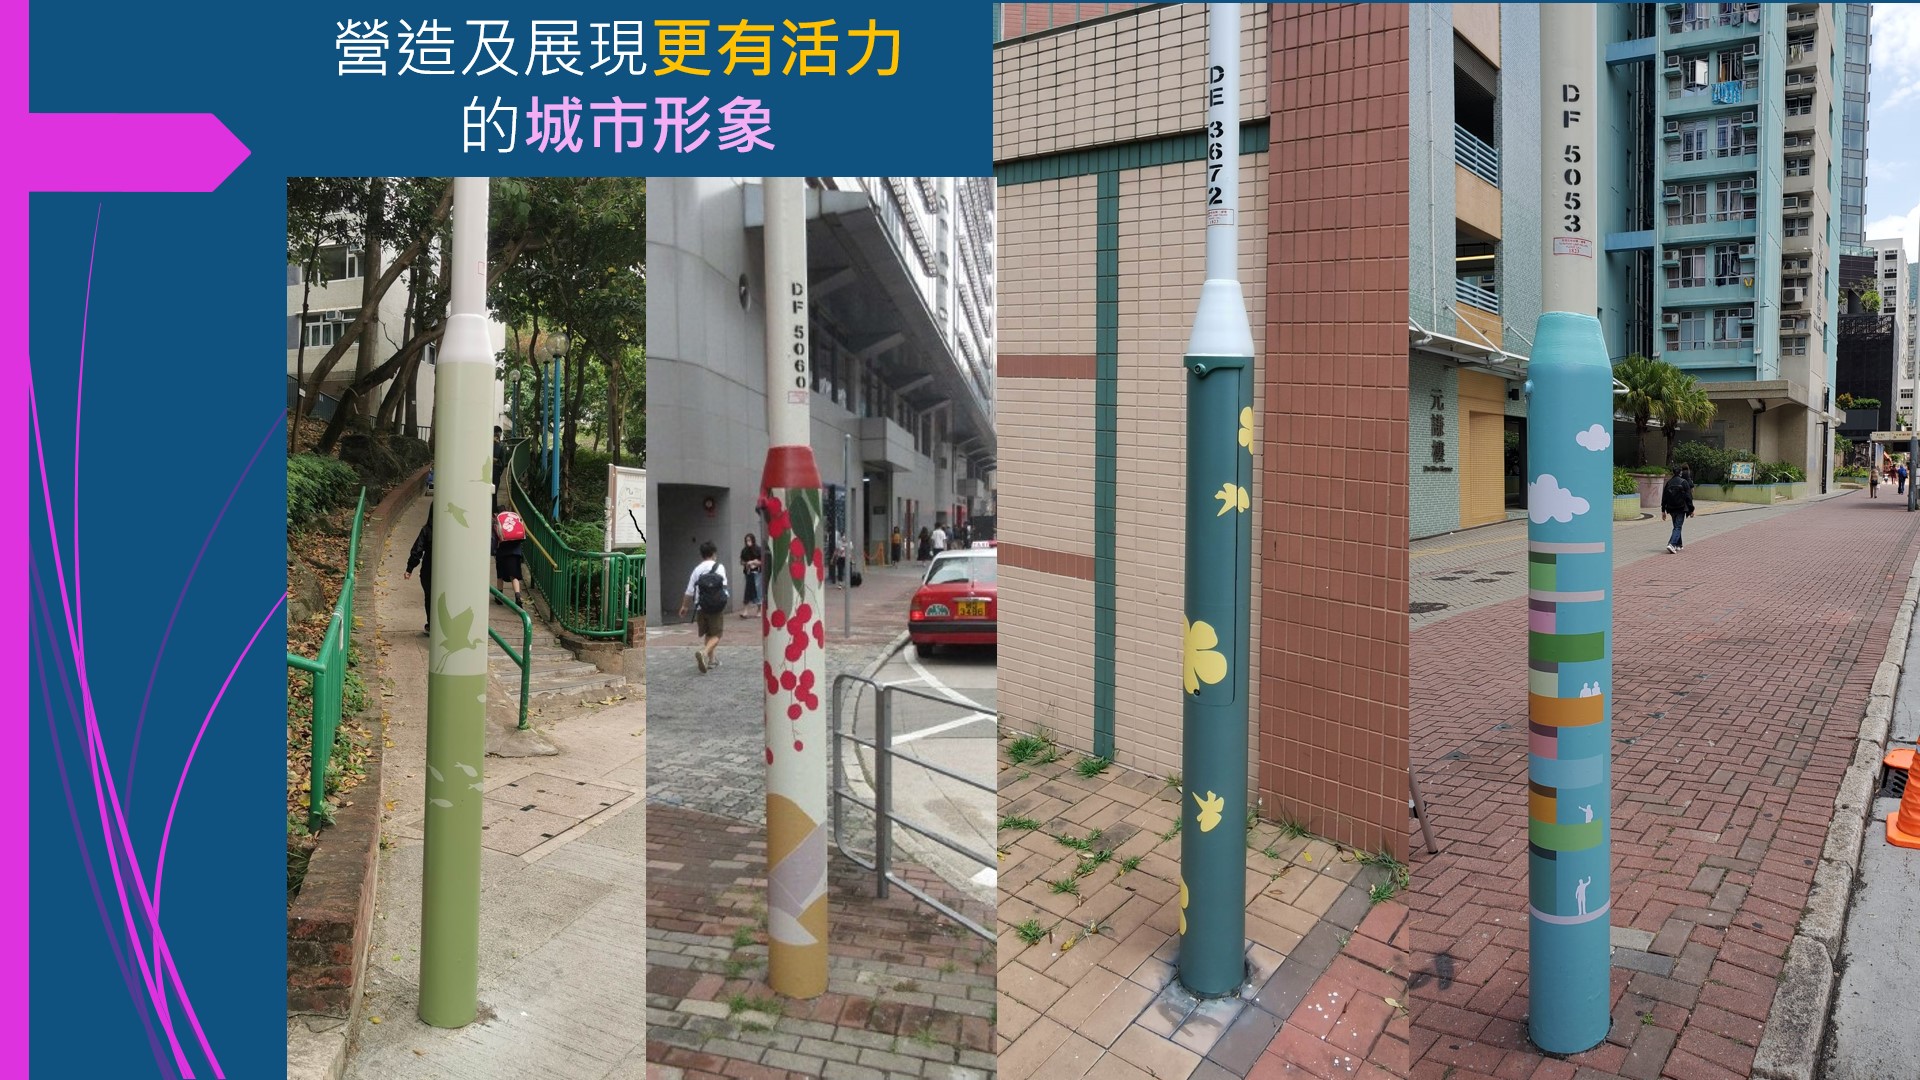 Photo 4: Lamppost affixing stickers with special design patterns at different districts